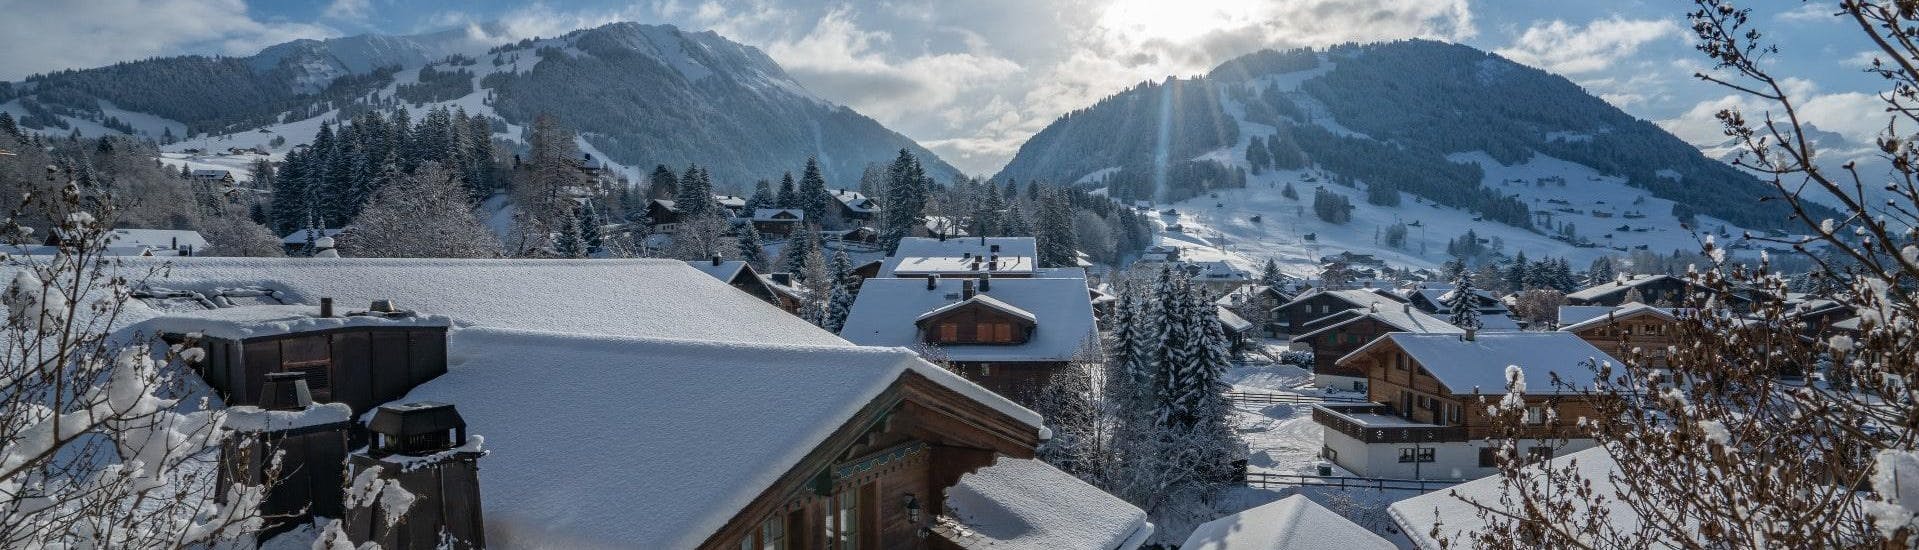 A view of the snow-covered village of Gstaad in the Swiss Alps, a popular place where skiers can book ski lessons with one of the local ski schools.